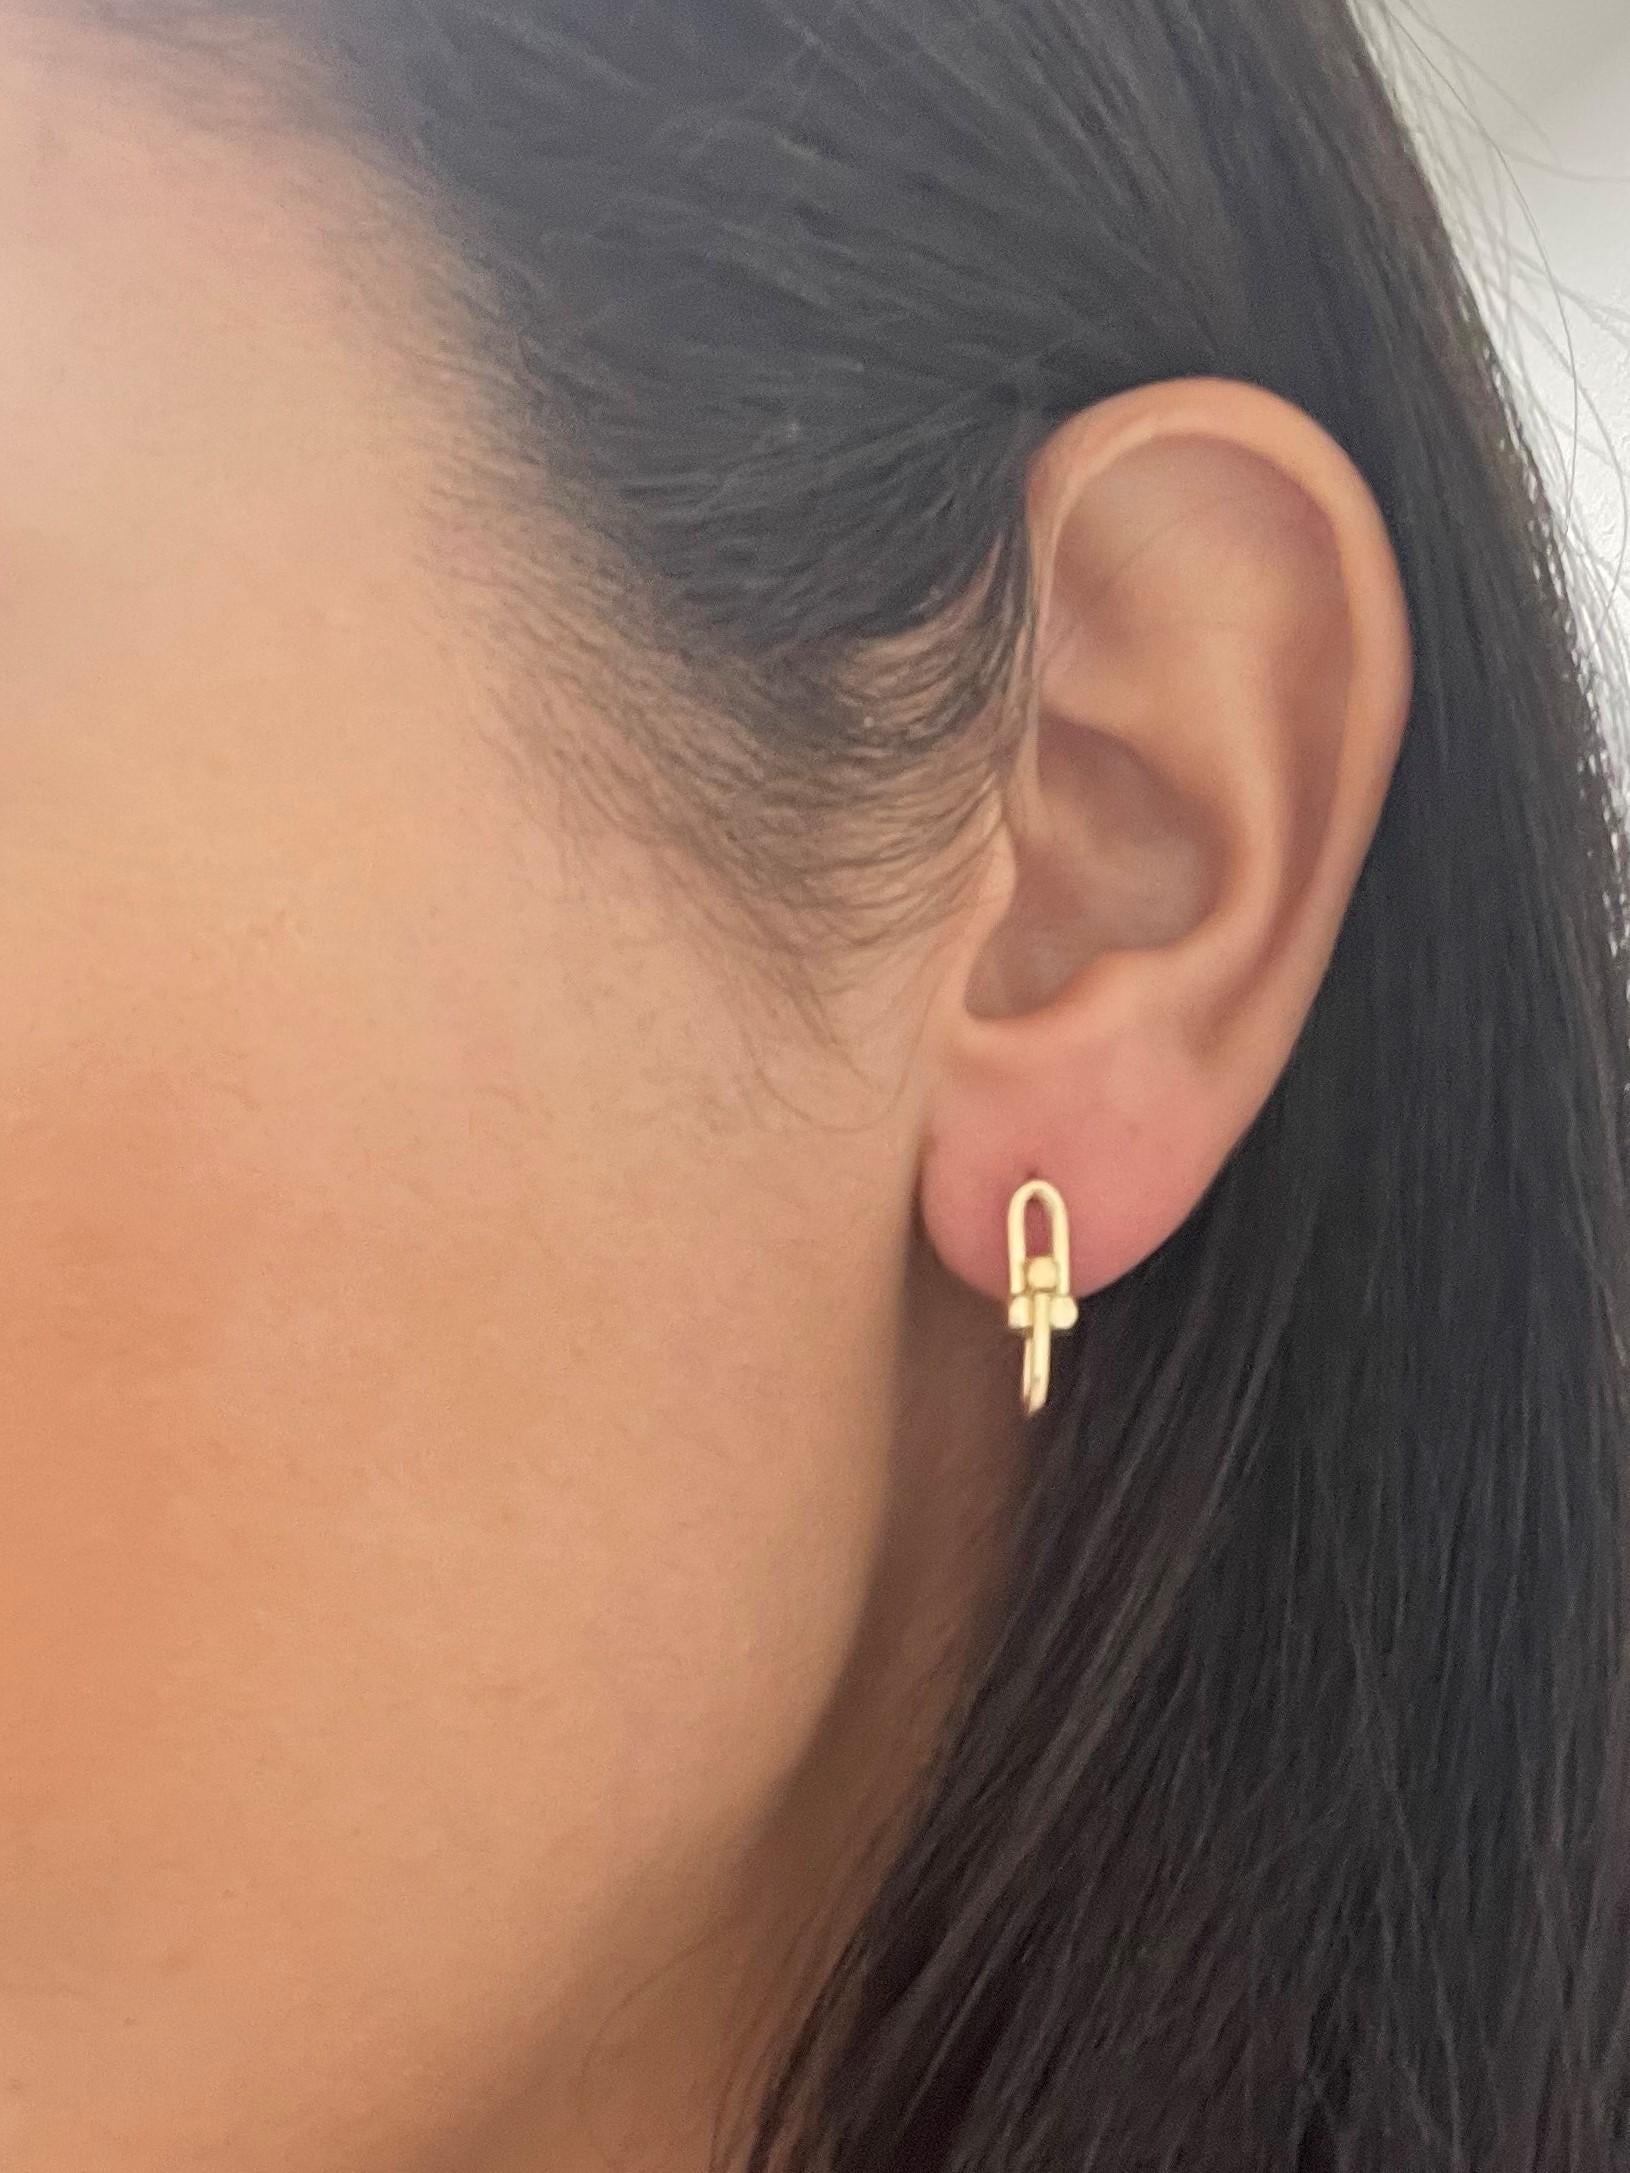 Quality Stud Earrings: Made from real 14k yellow gold.
 Surprise Your Loved Ones with Our Earrings: If you are looking to gift your spouse, girlfriend, kid, or mother on a special occasion like Christmas, birthday, engagement or anniversary then